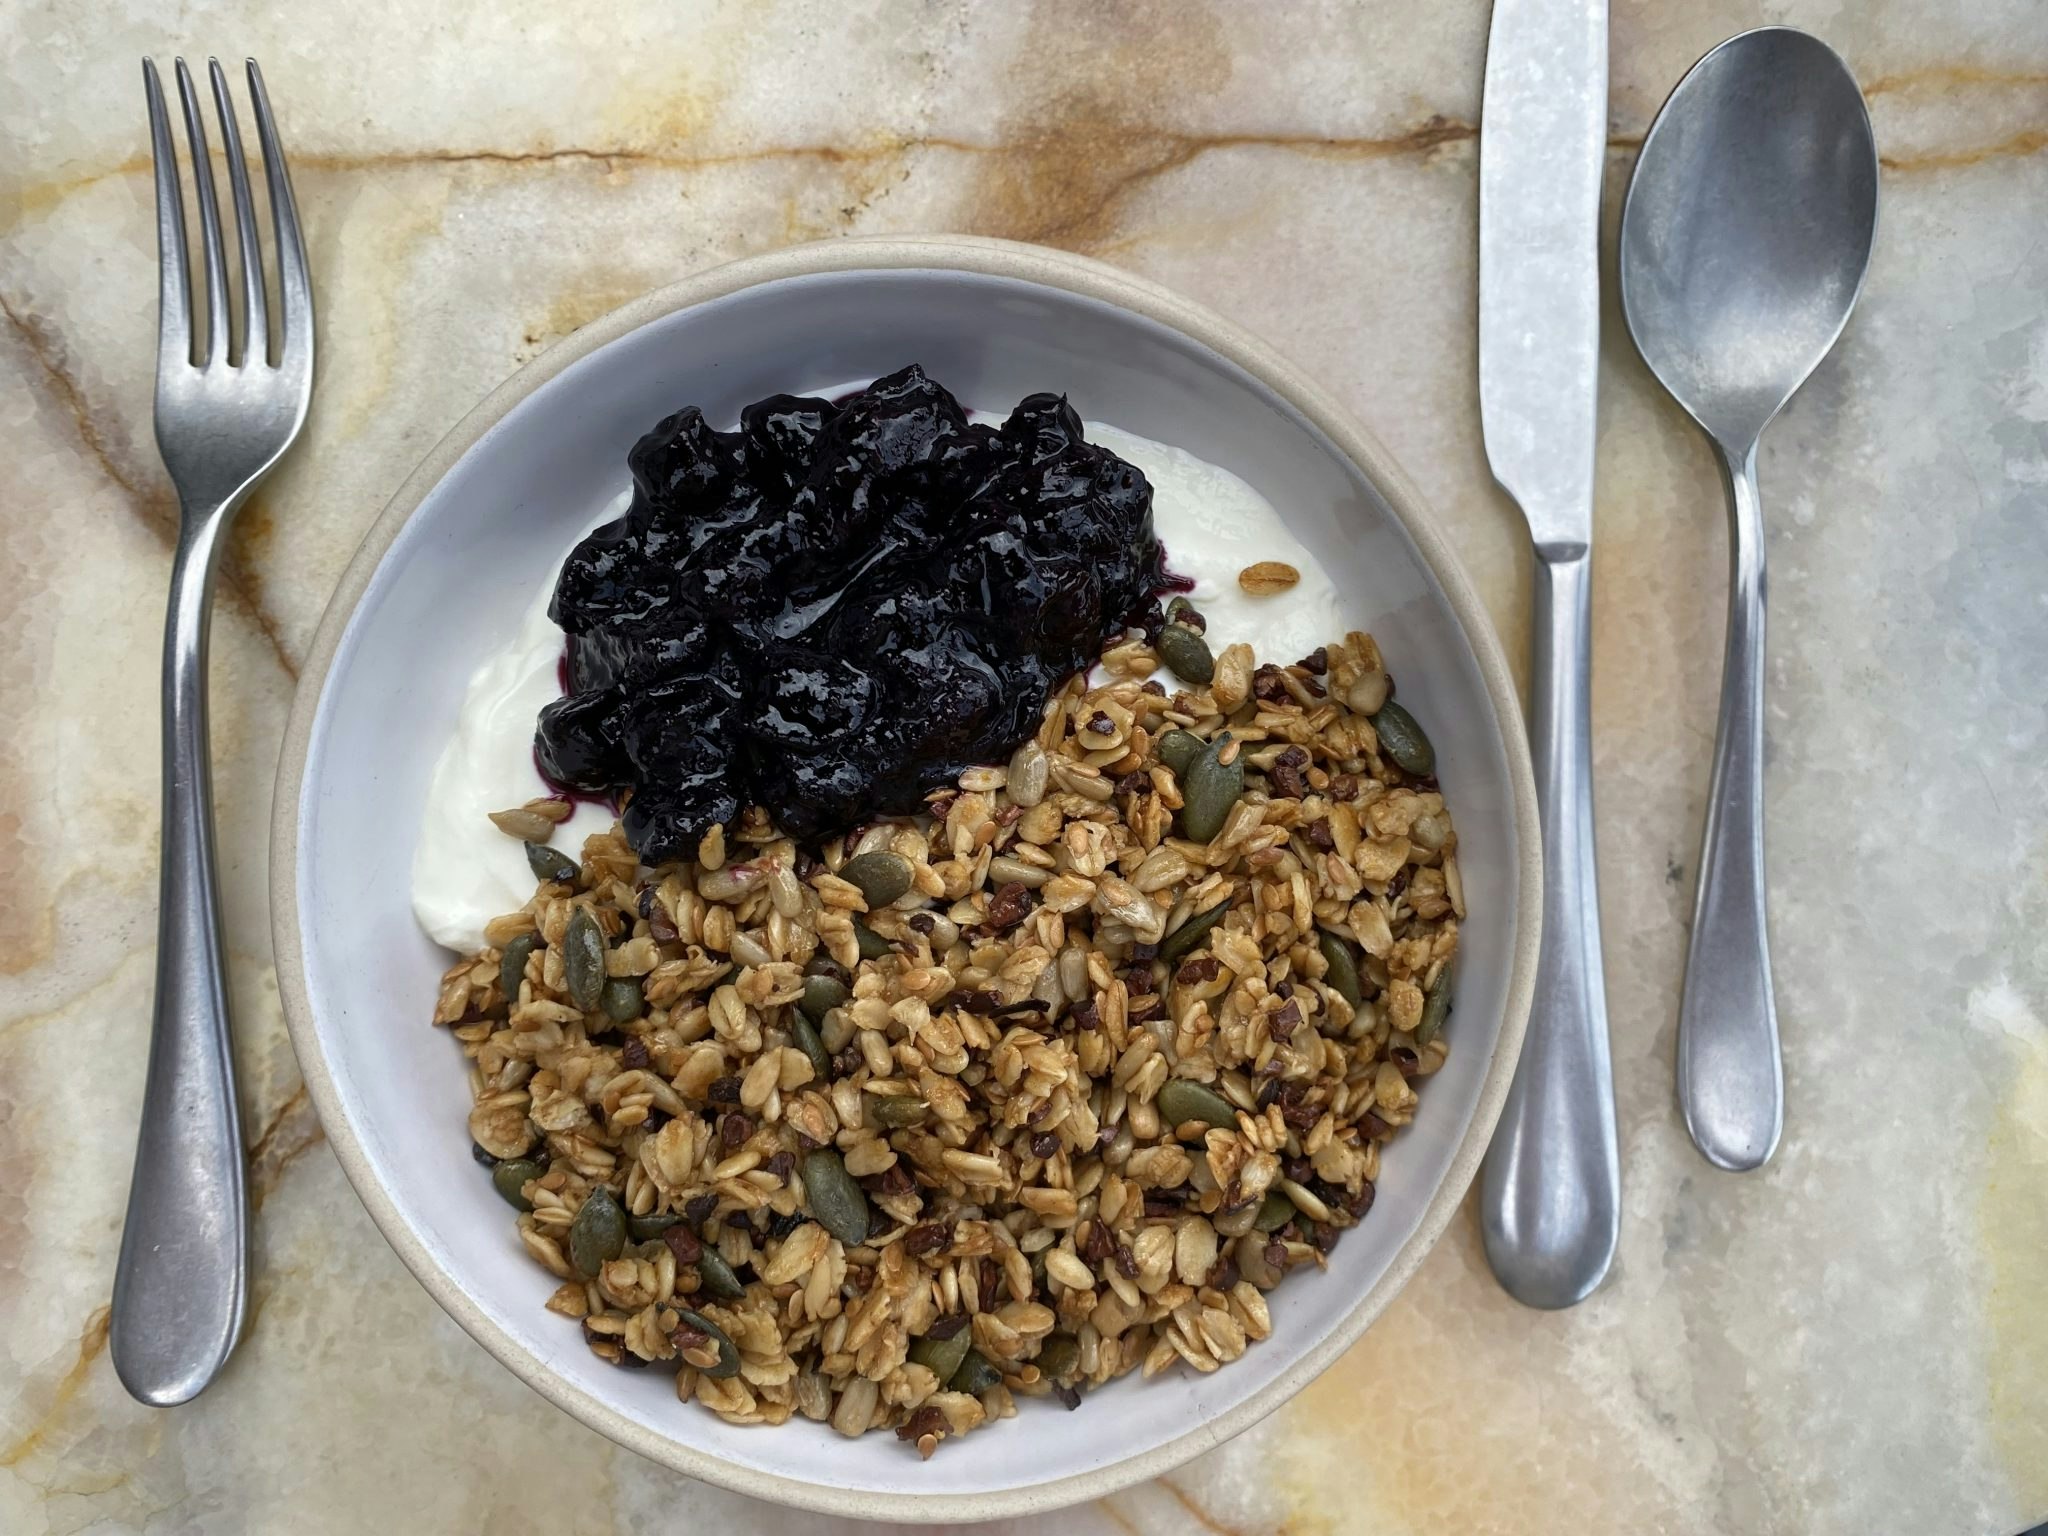 The breakfast: Yoghurt, fruit compote and granola